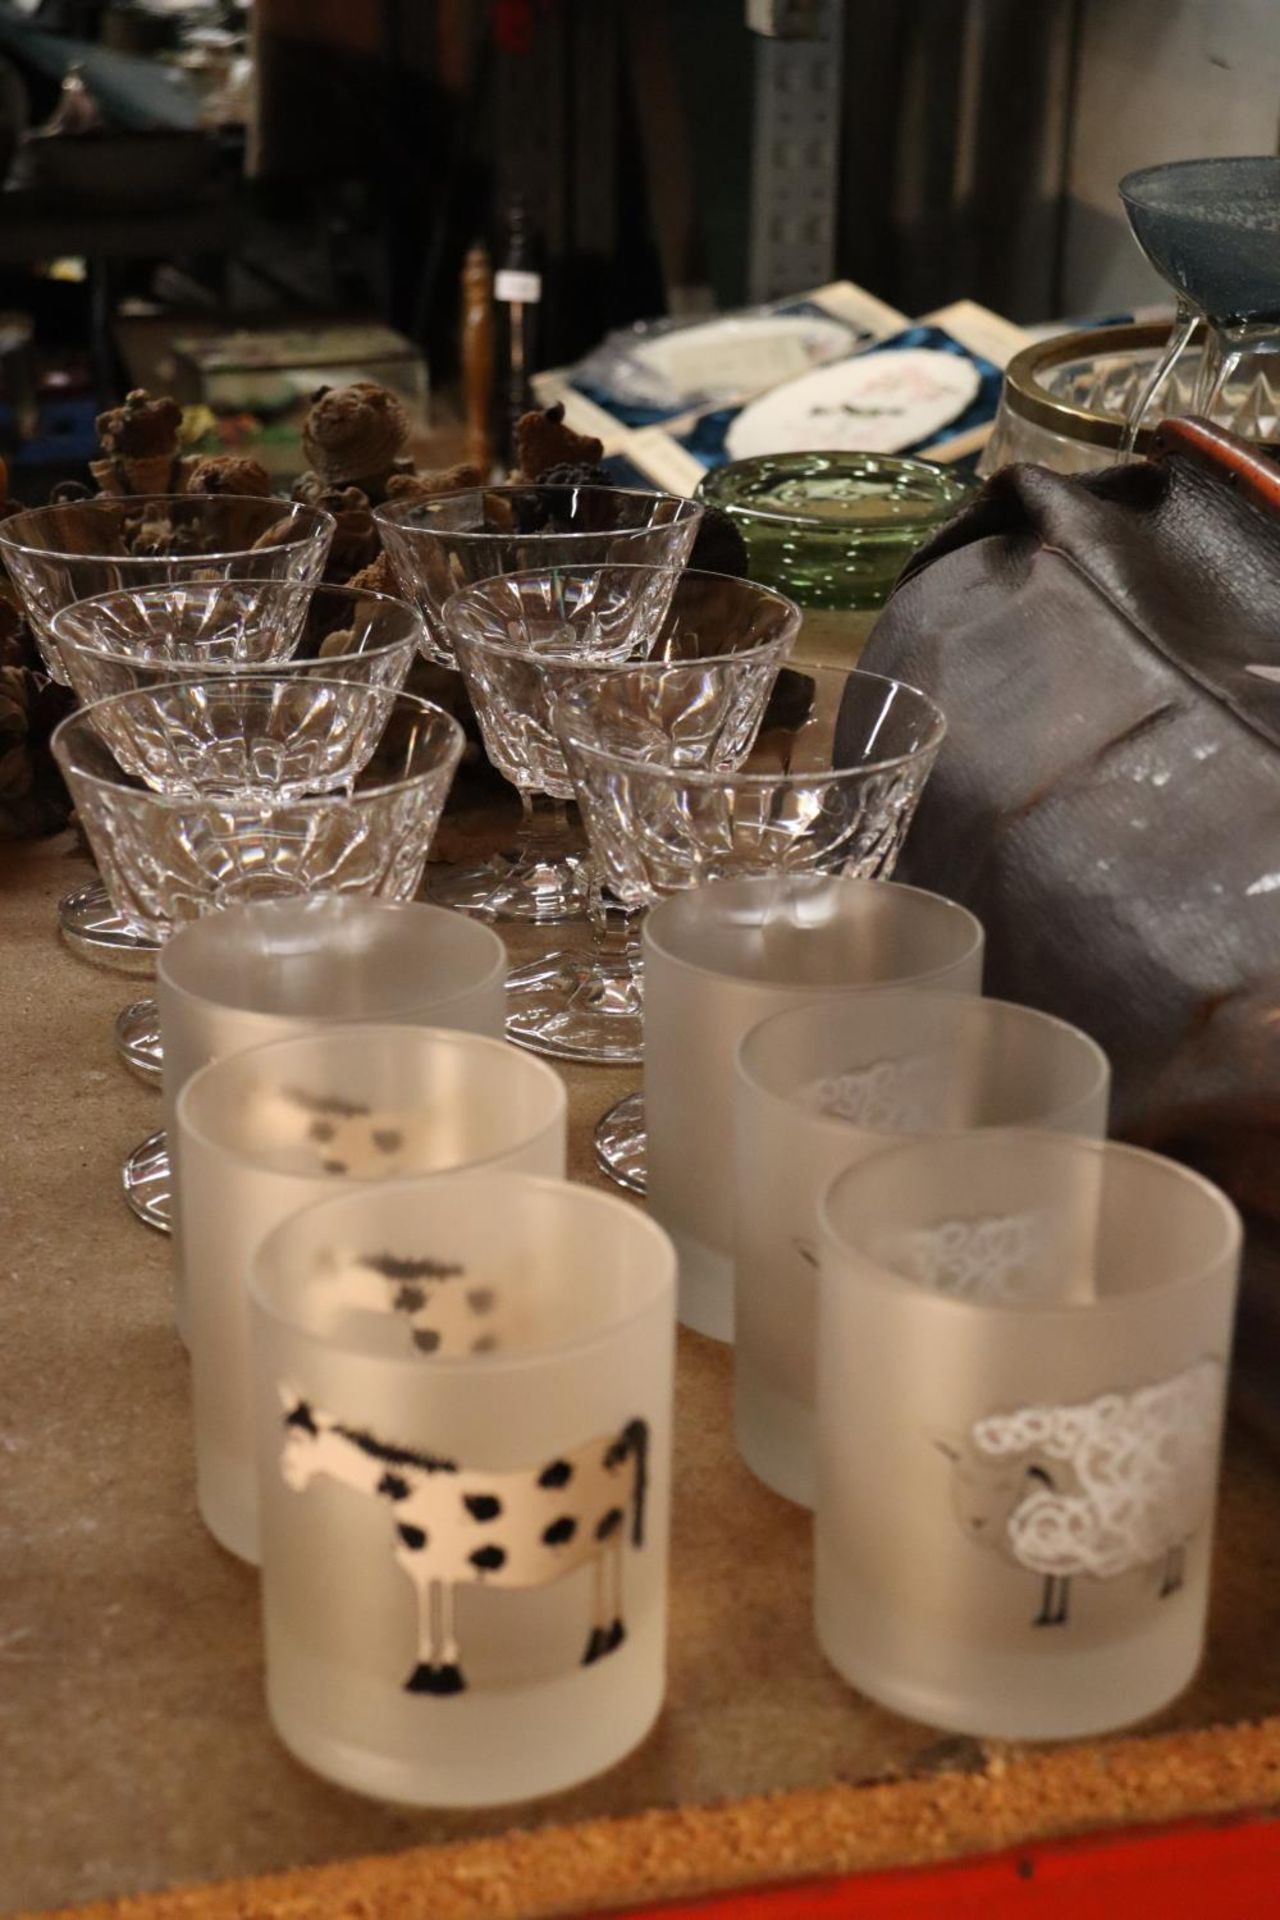 SIX GLASS SUNDAE DISHES TOGETHER WITH SIX DRINKING GLASSES ETCHED WITH ANIMALS